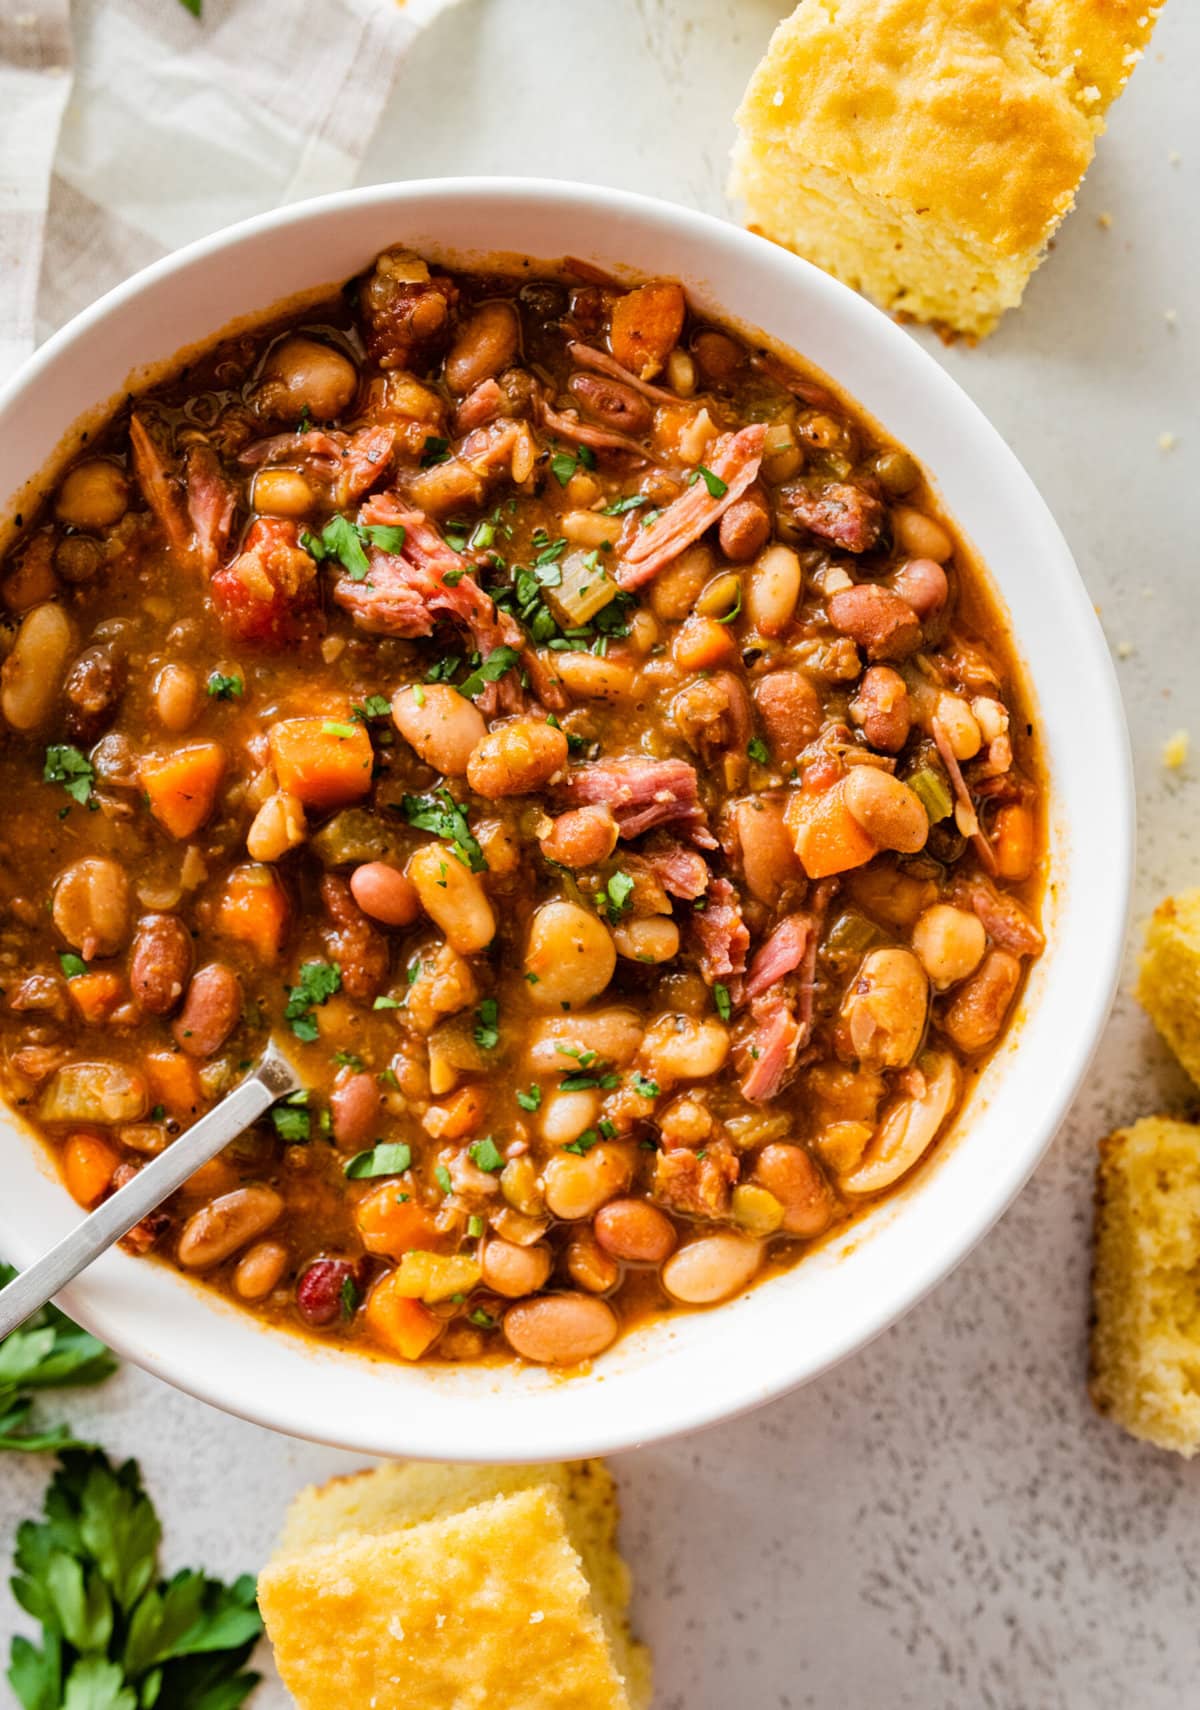 15 bean soup mix recipe in a white bowl with slices of cornbread on the side. Parsley for garnish. 